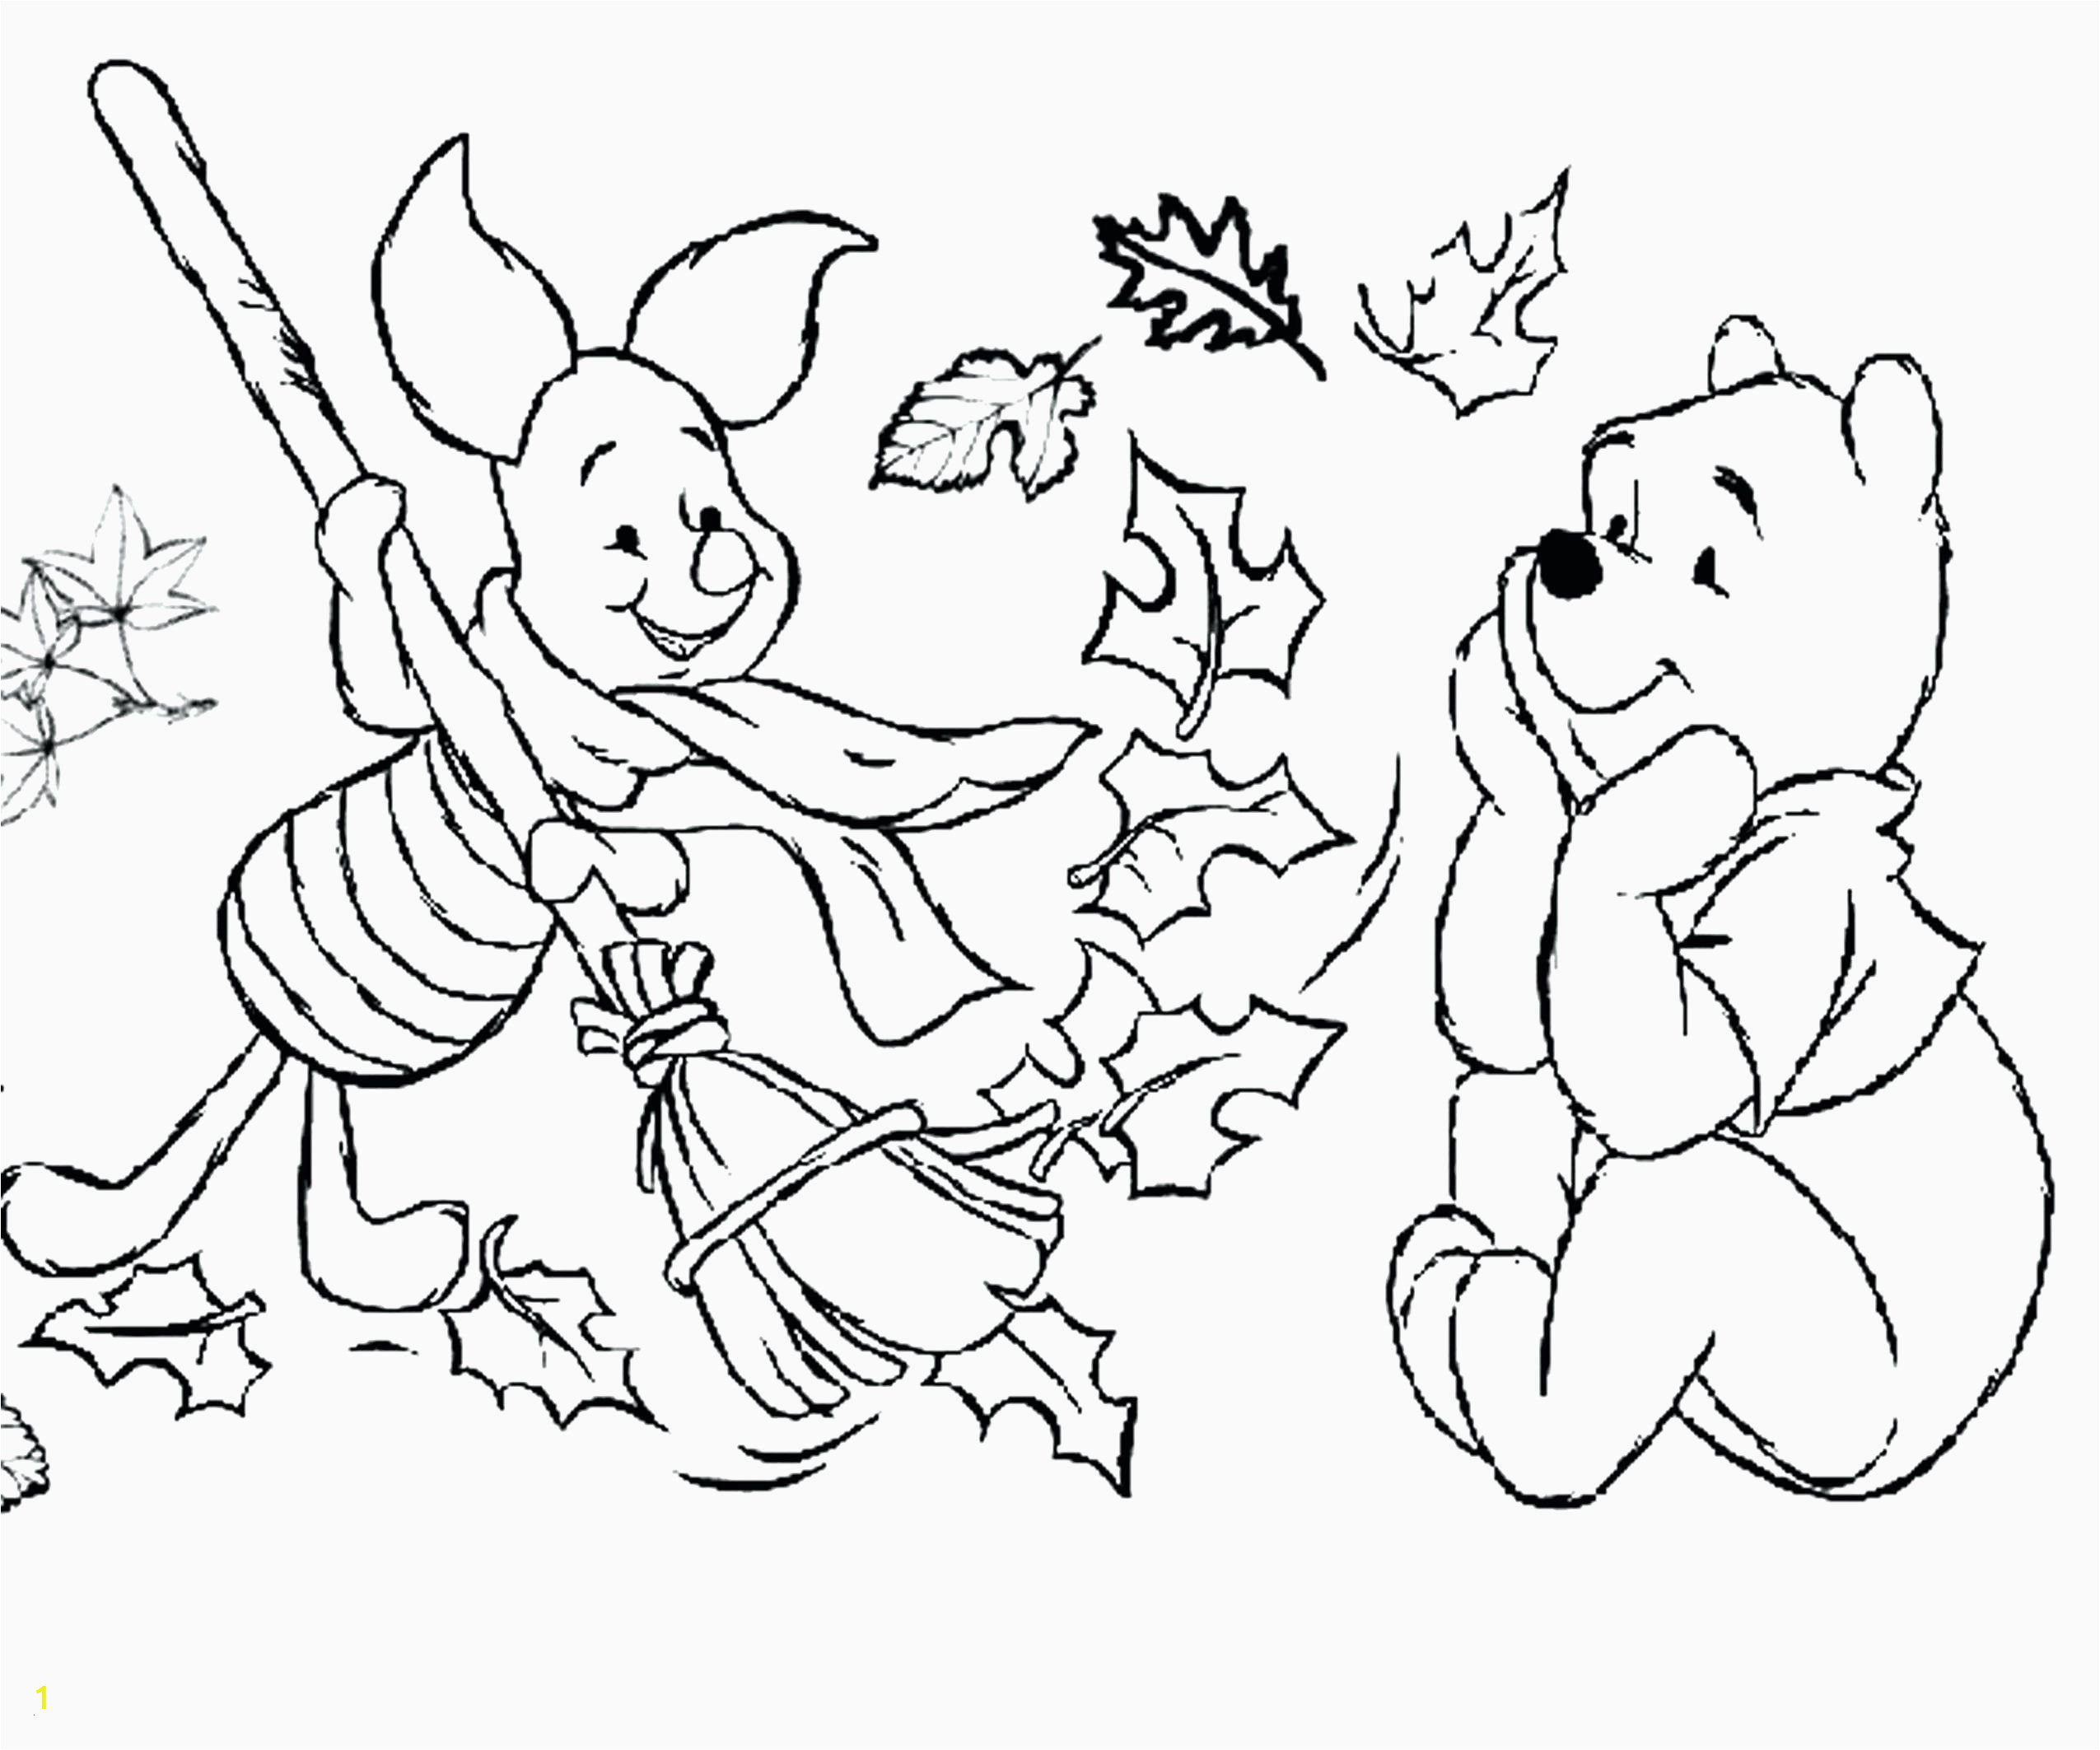 Disney Princess Halloween Coloring Pages Free Coloring Pages for Preschool Di 2020